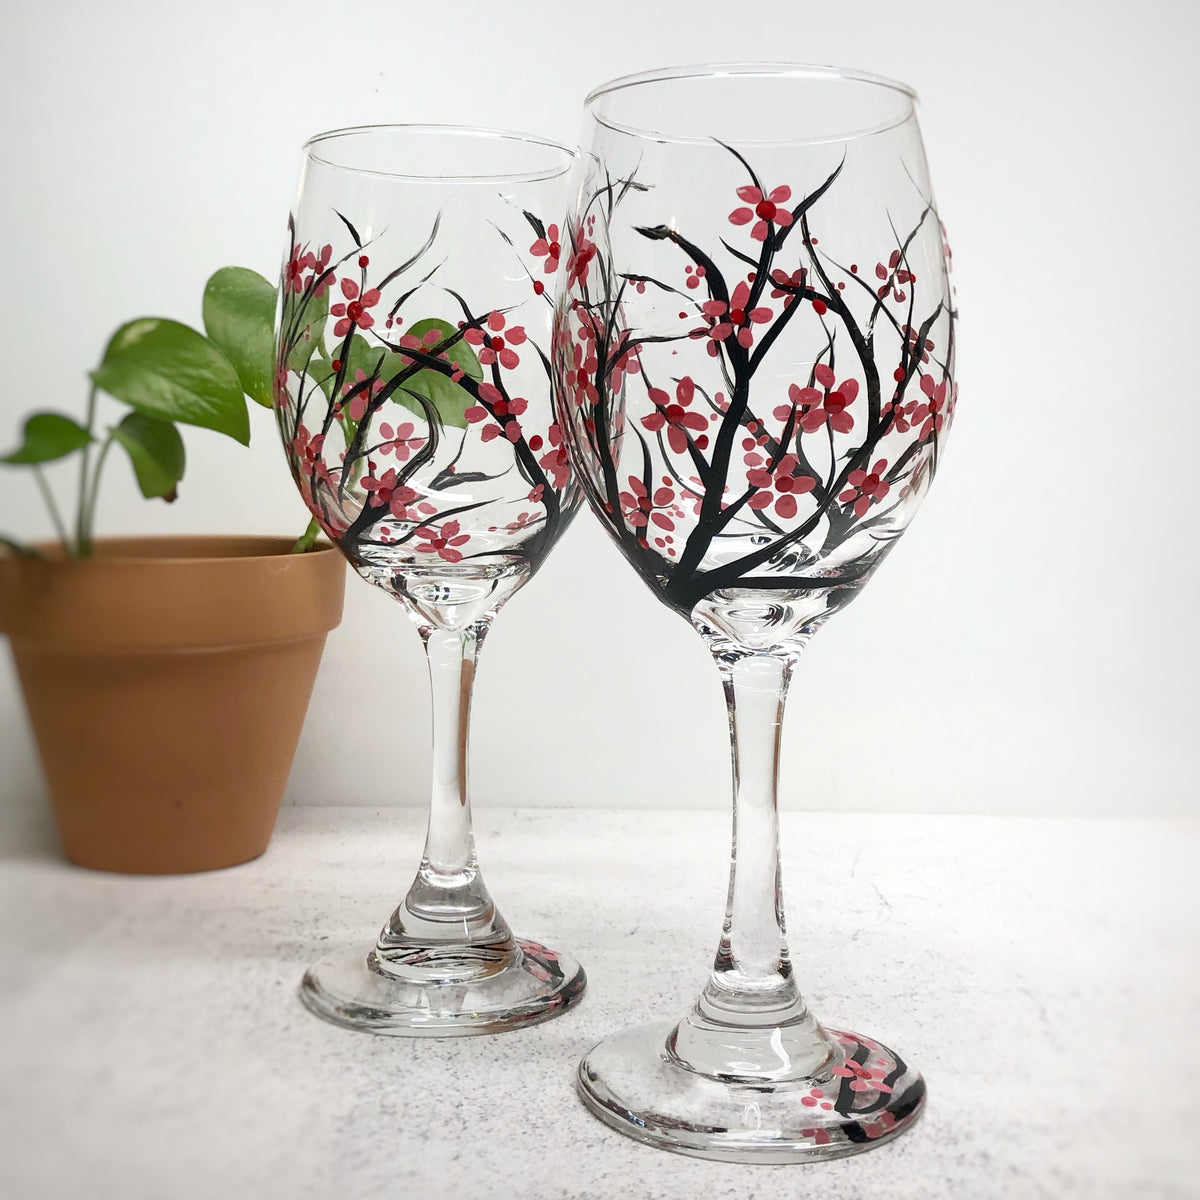 Hand Painted Cherry Blossom Wine Glasses (Set of 2)